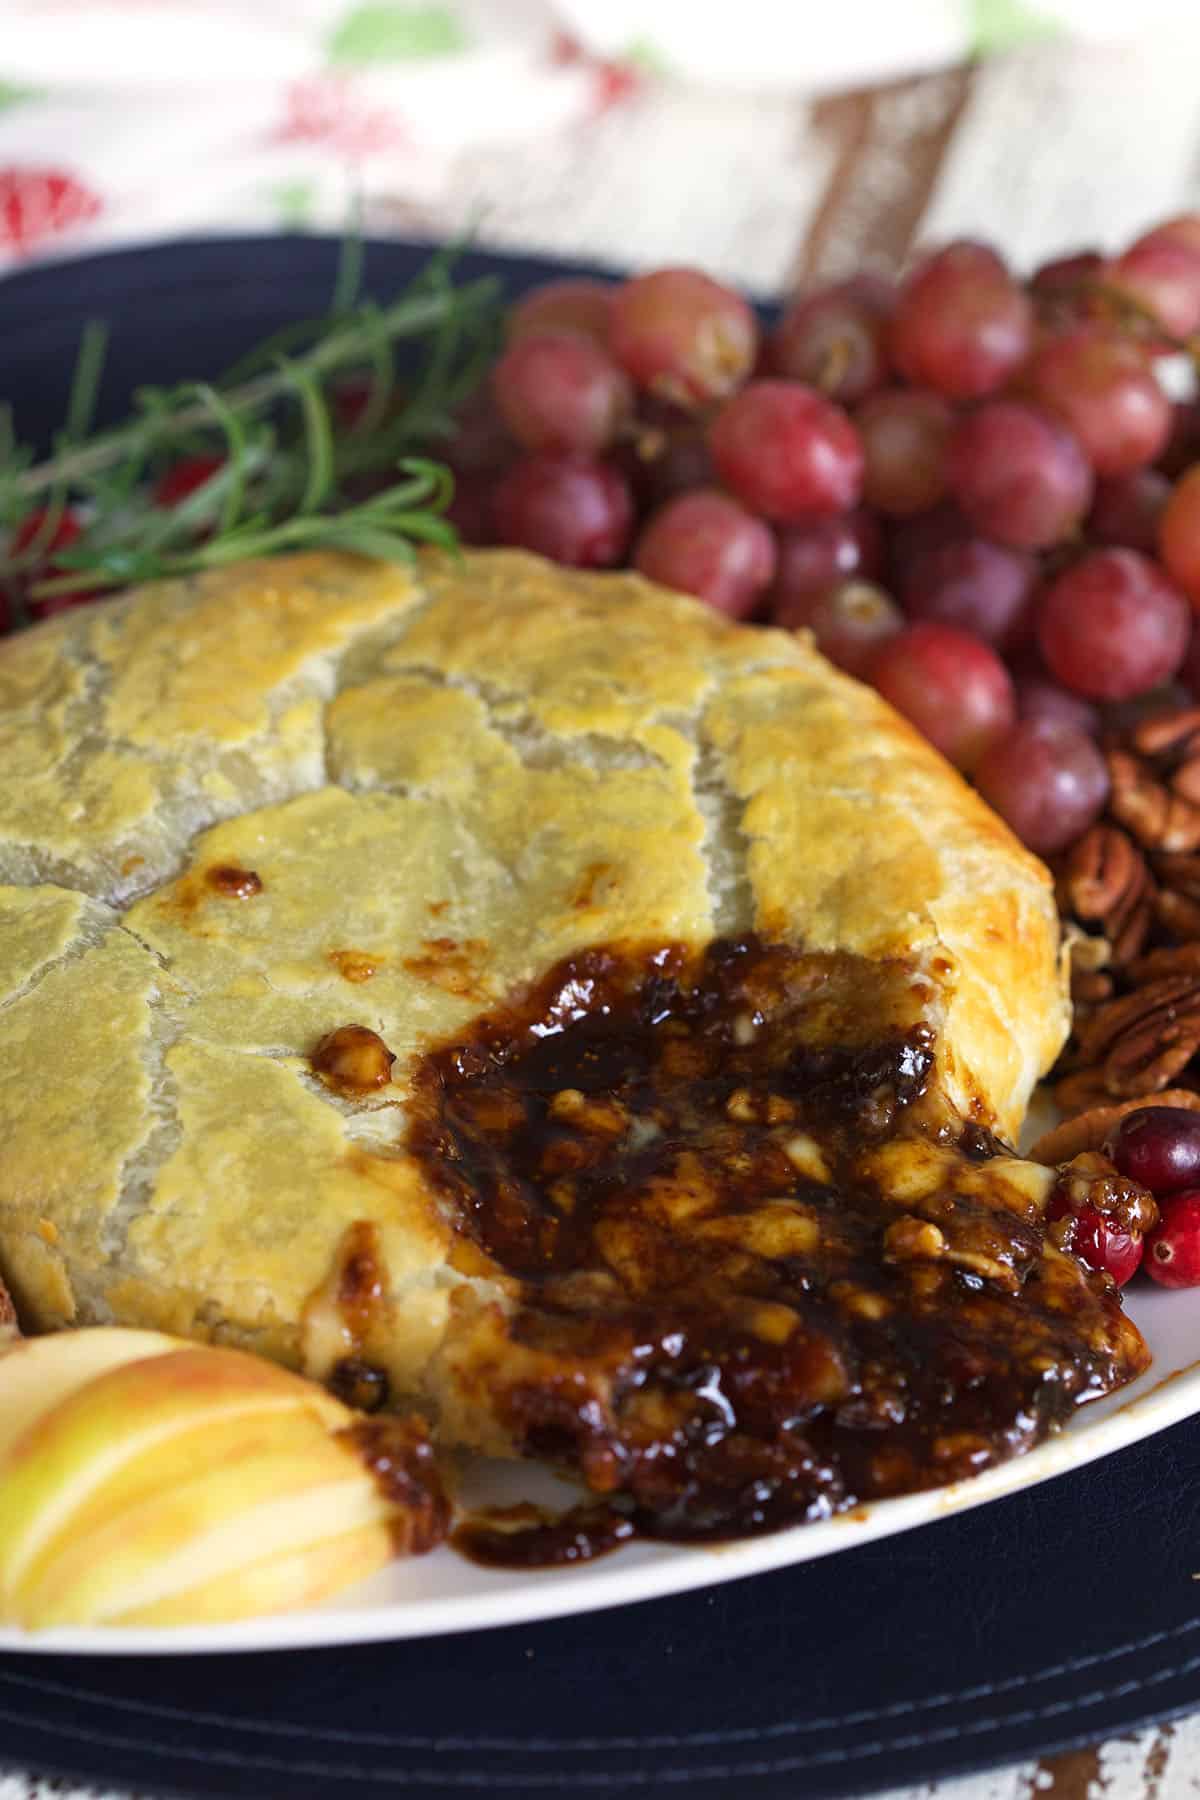 Fig jam is oozing out of a warm serving of baked brie.